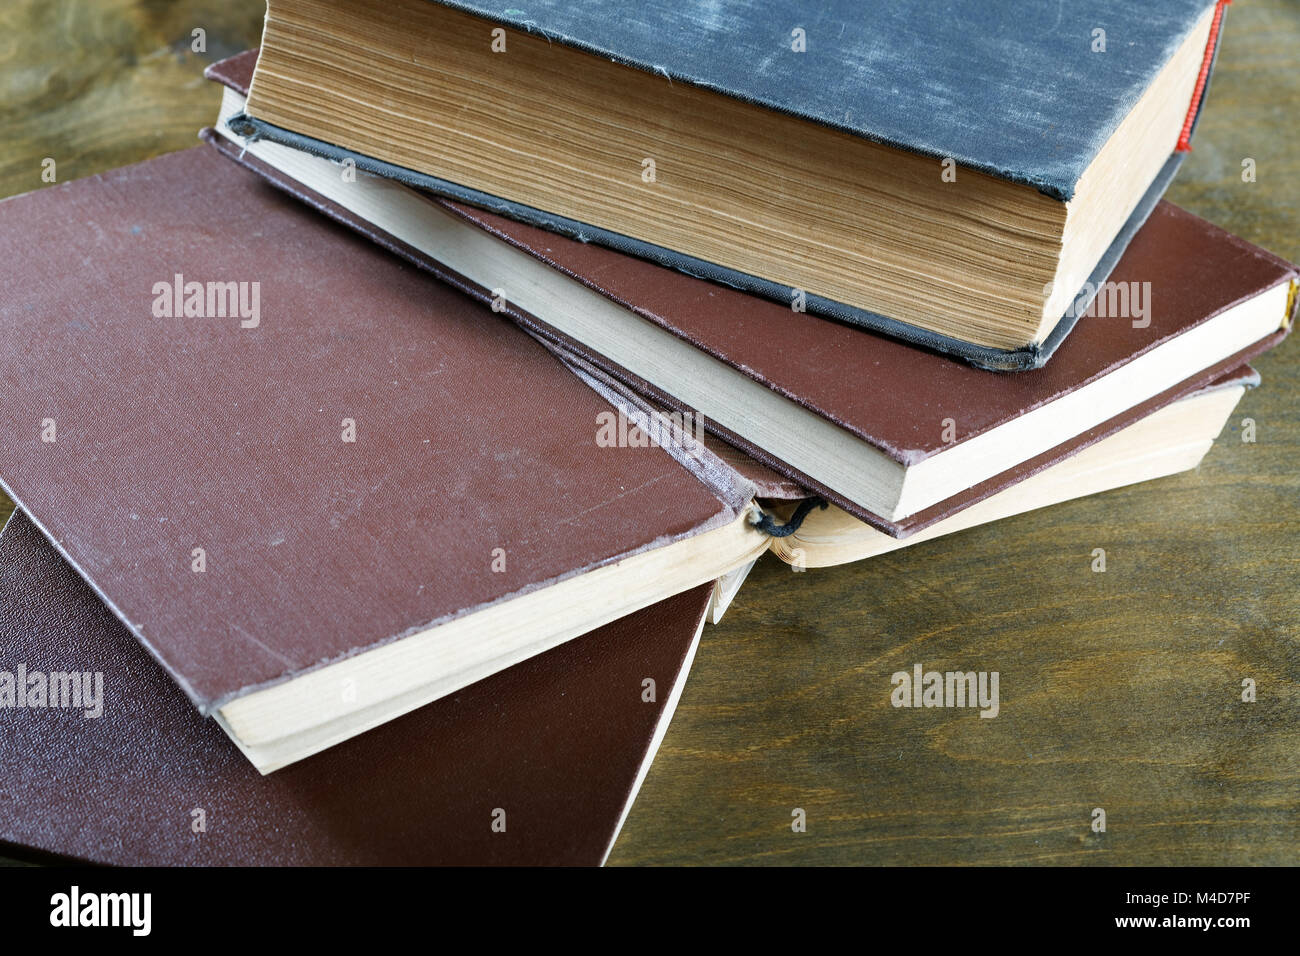 old books in brown cover close up Stock Photo